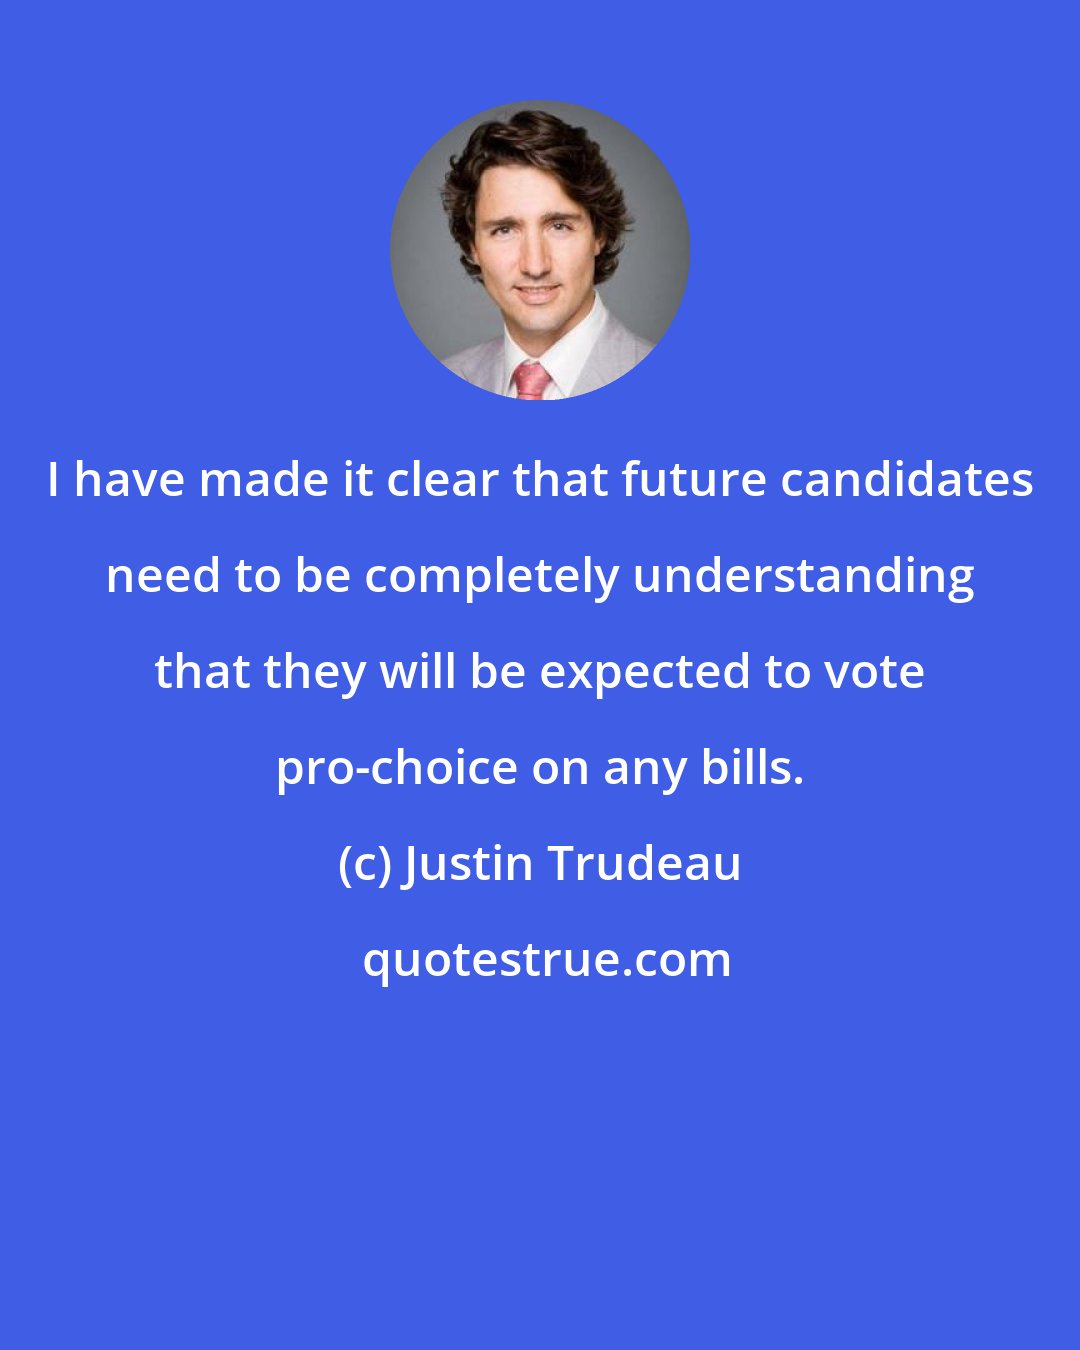 Justin Trudeau: I have made it clear that future candidates need to be completely understanding that they will be expected to vote pro-choice on any bills.